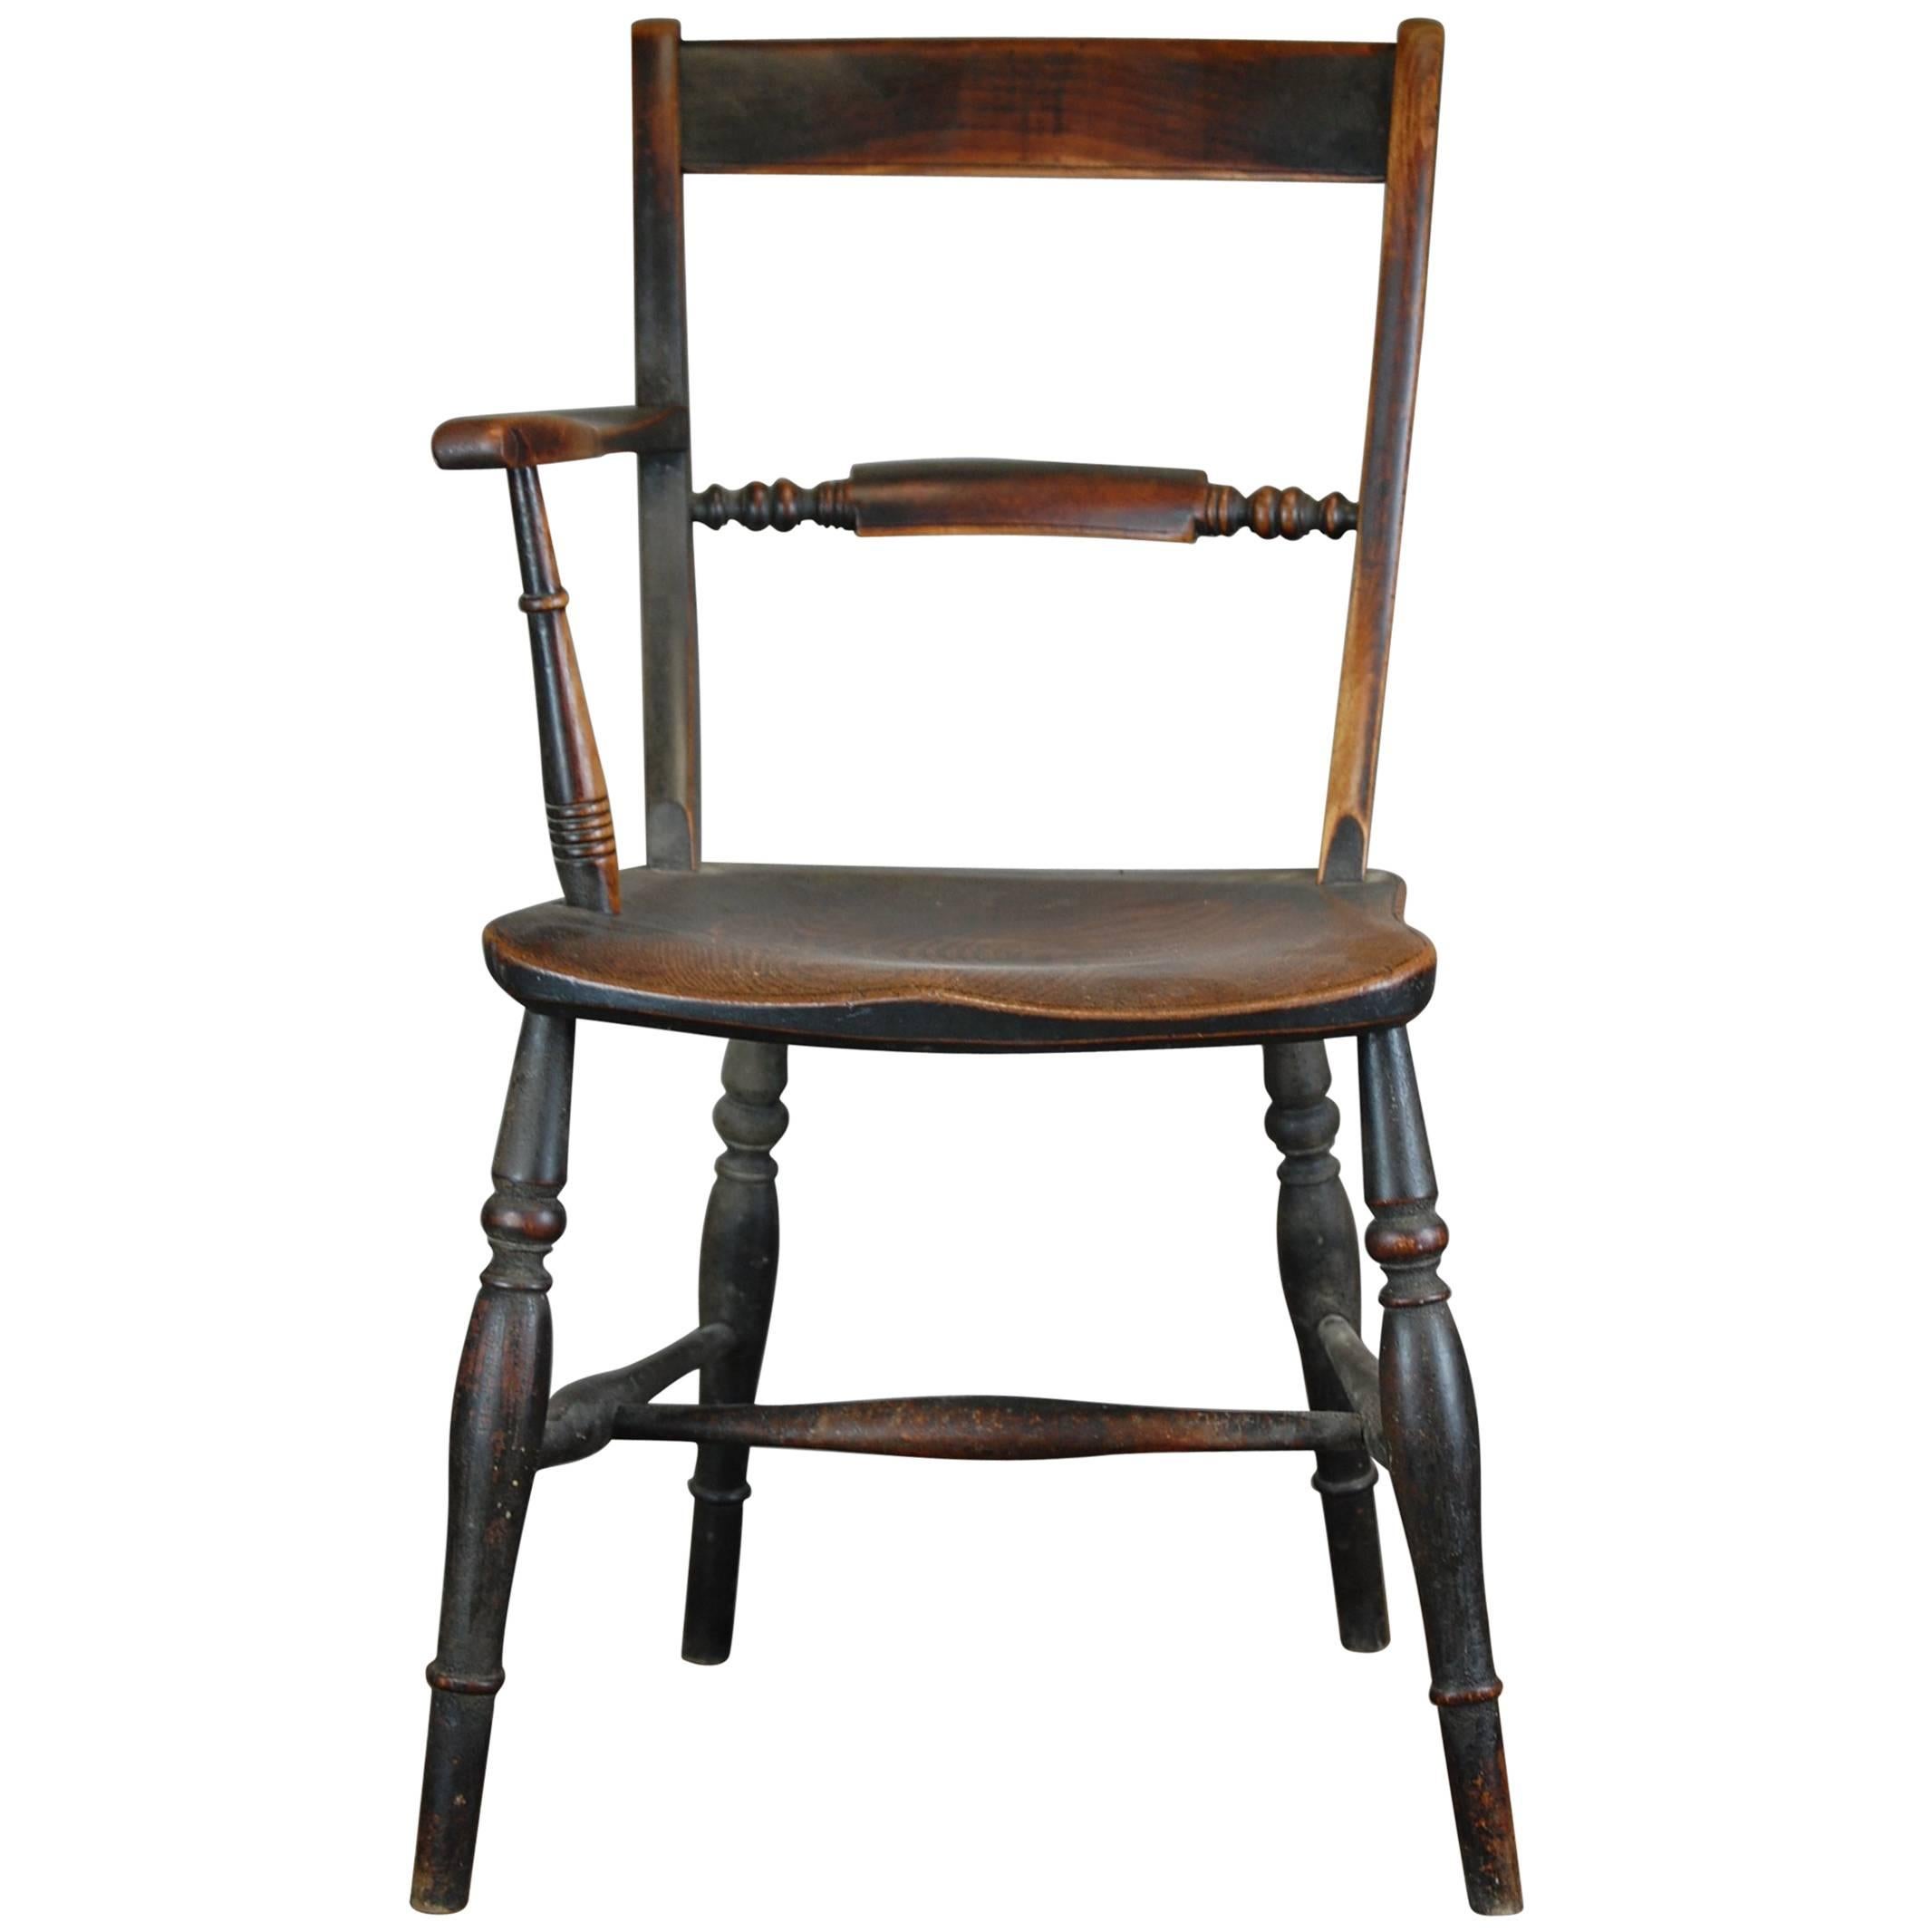 Late 19th Century One Armed Military Officers Windsor Chair